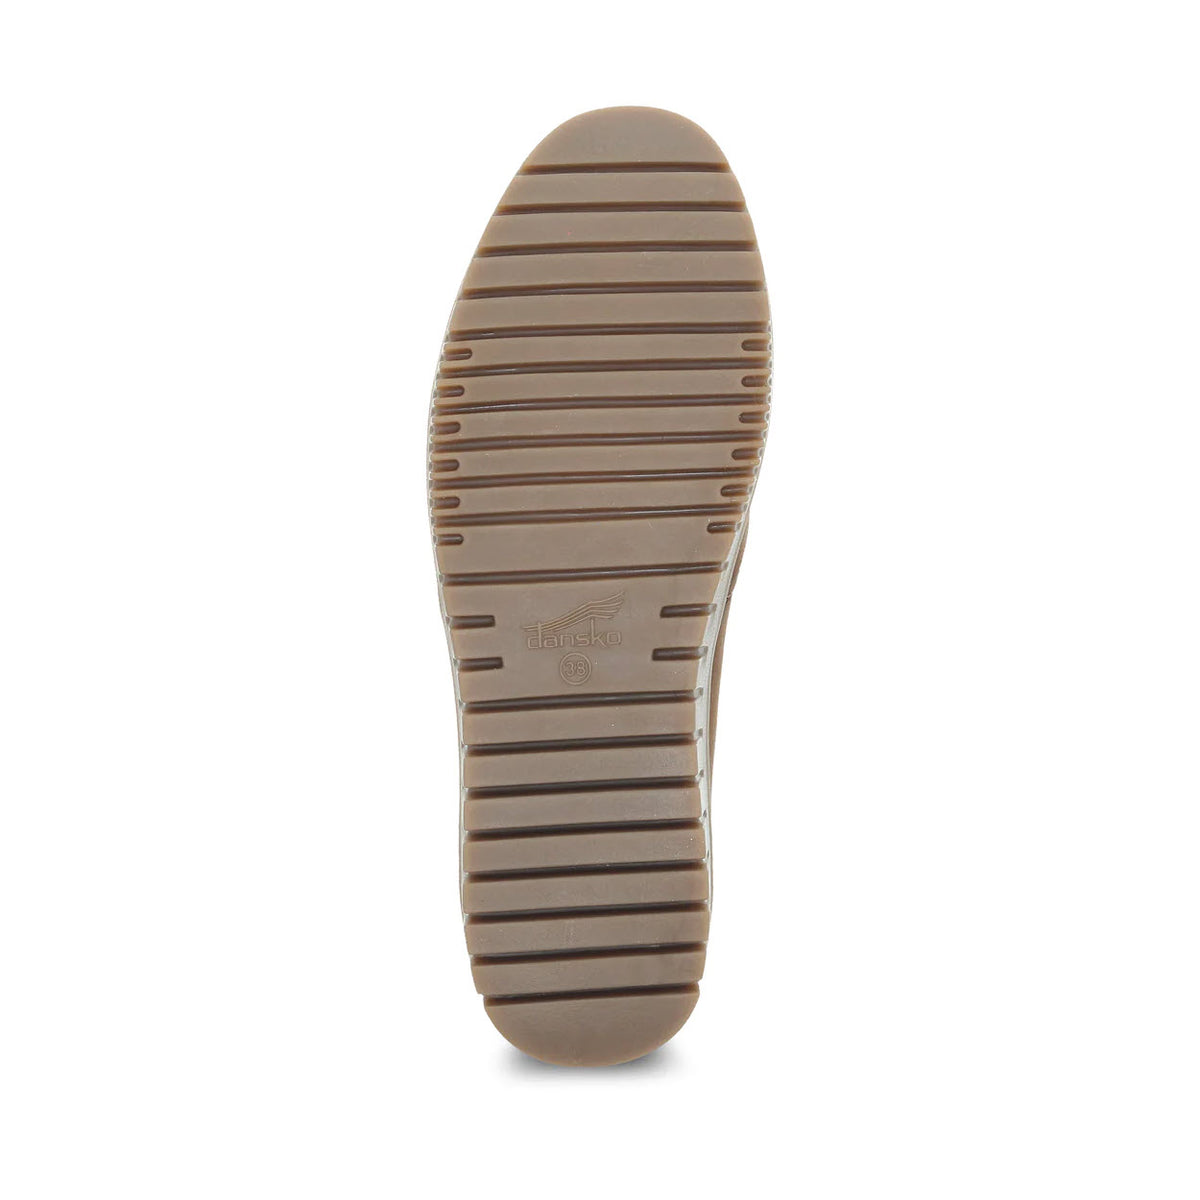 Sole of a brown shoe with molded arch shape, horizontal tread patterns, and the brand name &quot;Dansko&quot; embossed at the center.